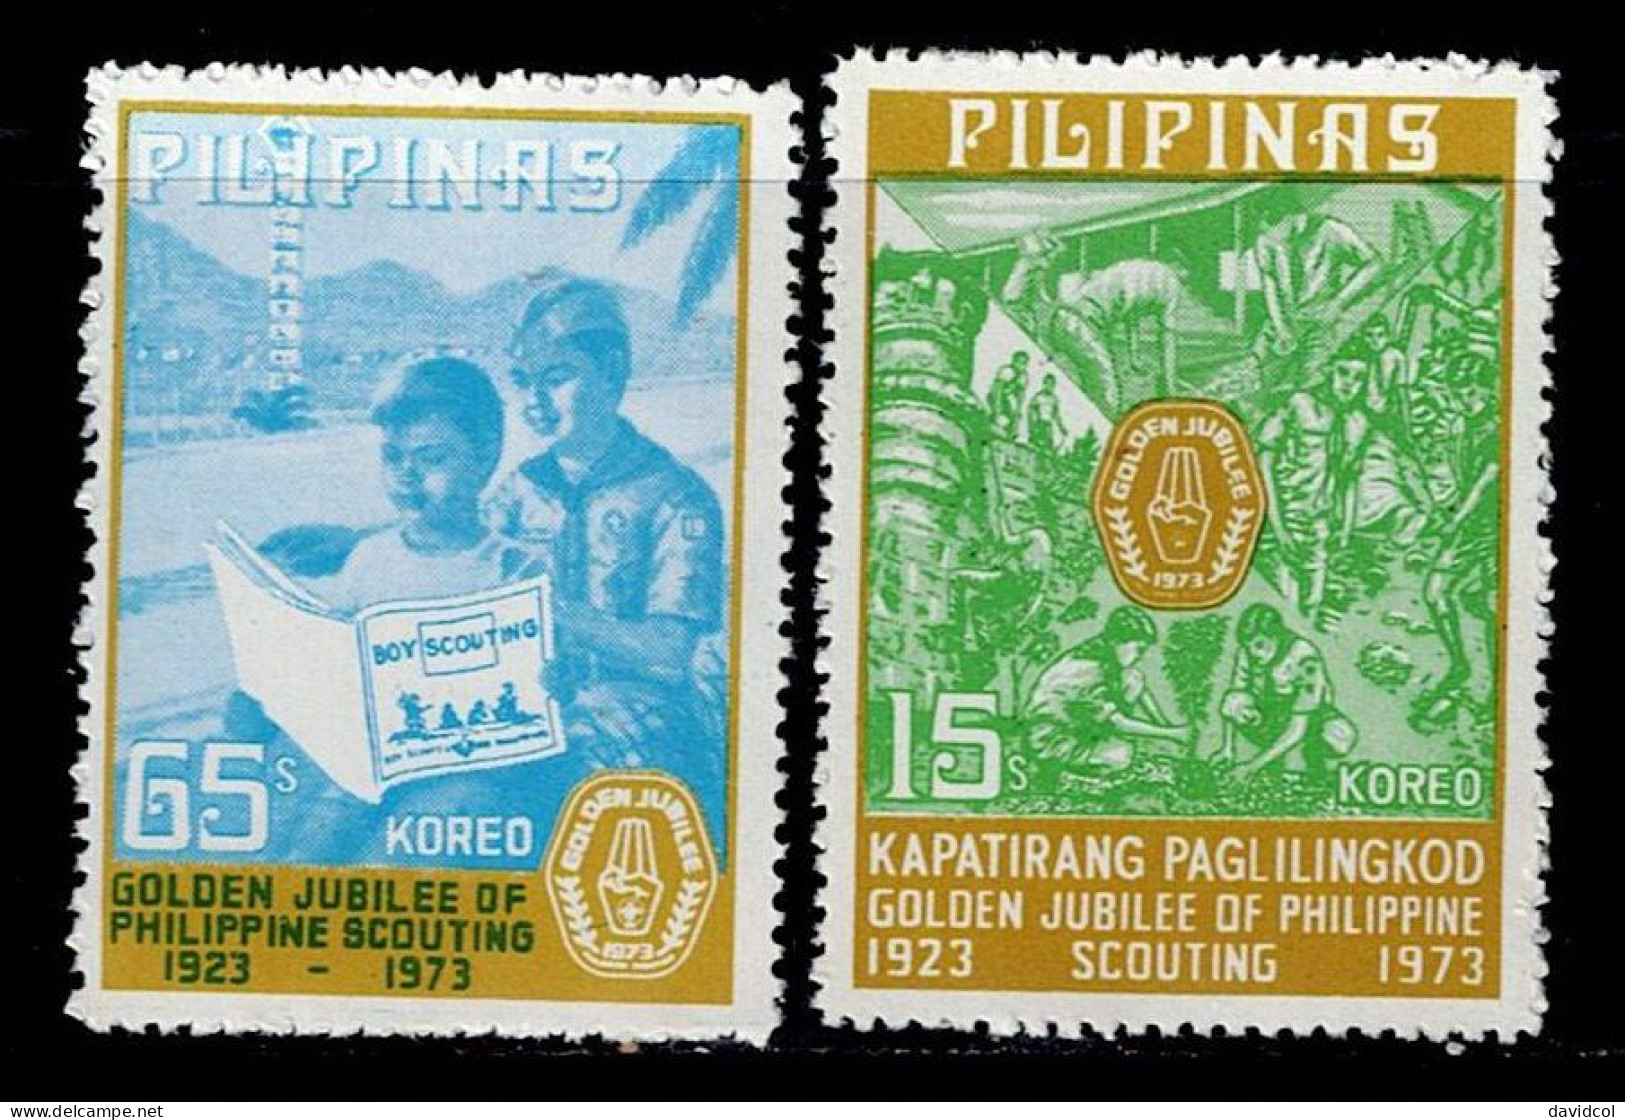 FIL-04- PHILIPPINES - 1973 - MNH -SCOUTS- GOLDEN JUBILEE OF PHILIPPINE SCOUTING - Philippines